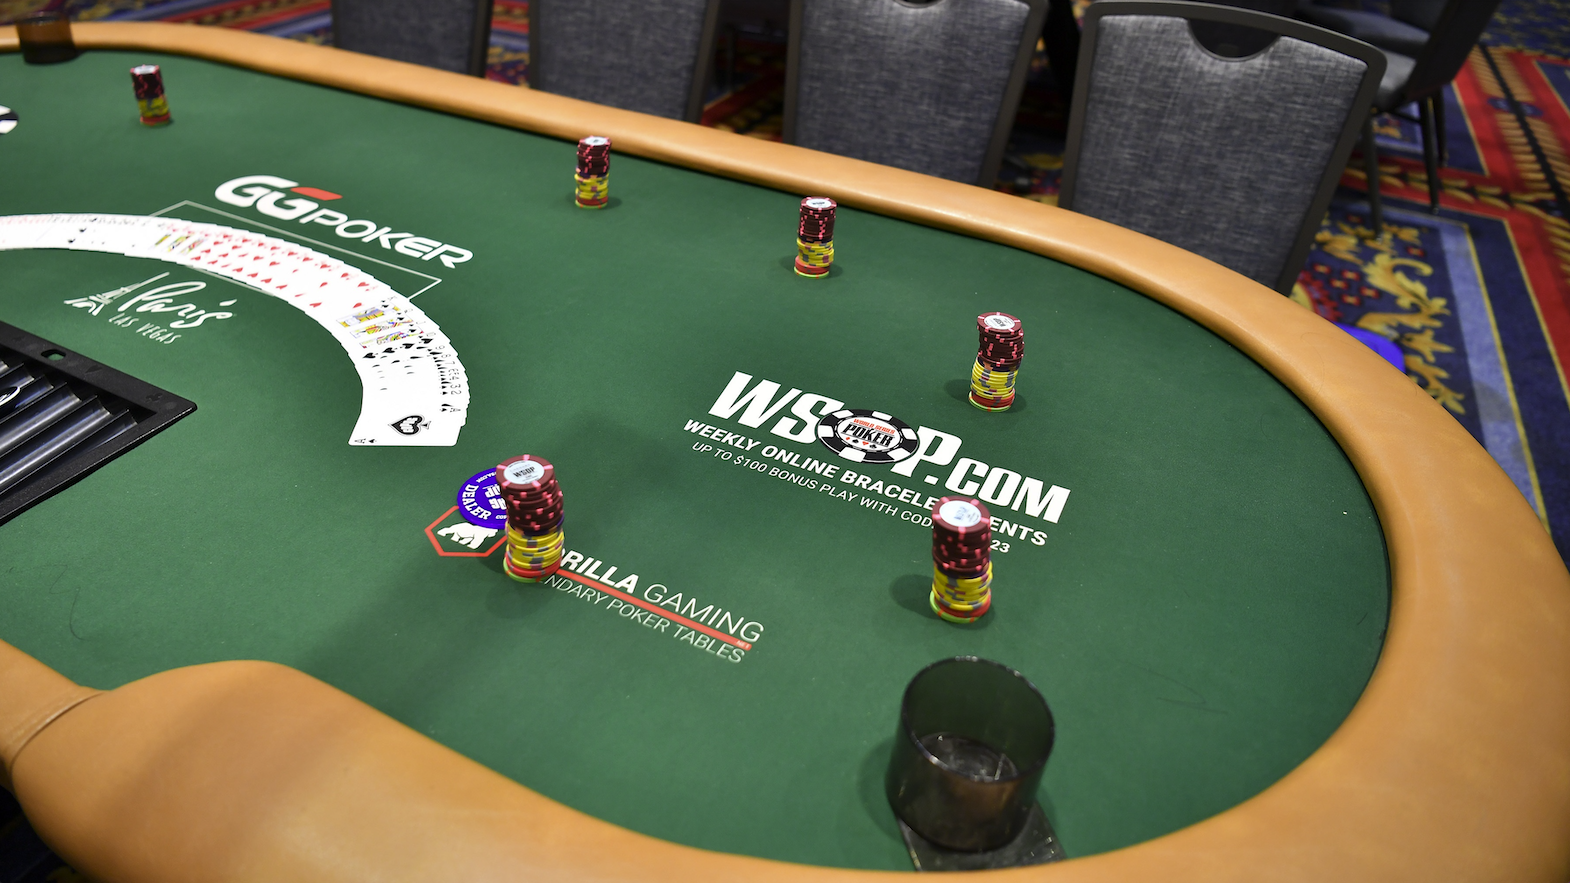 World Series of Poker live stream how to watch the WSOP 2023 Main event online and on TV from anywhere TechRadar